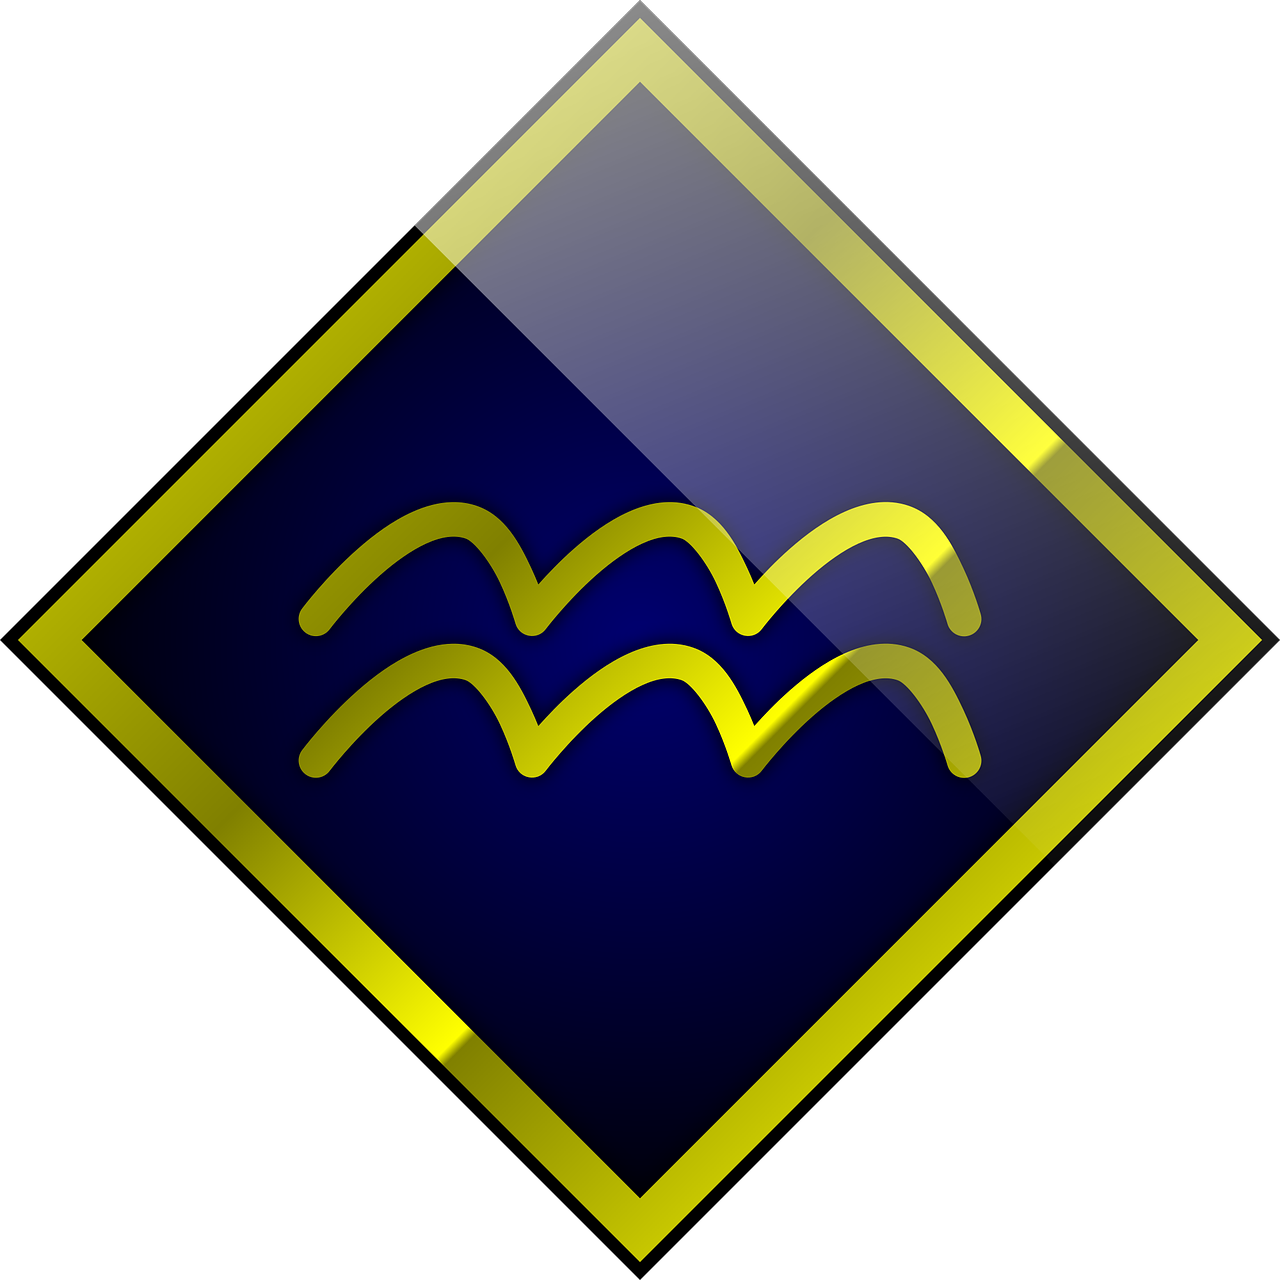 a blue and yellow diamond with waves on it, by Zoran Mušič, pixabay, hieroglyphic signs, flooding, badge, swimming